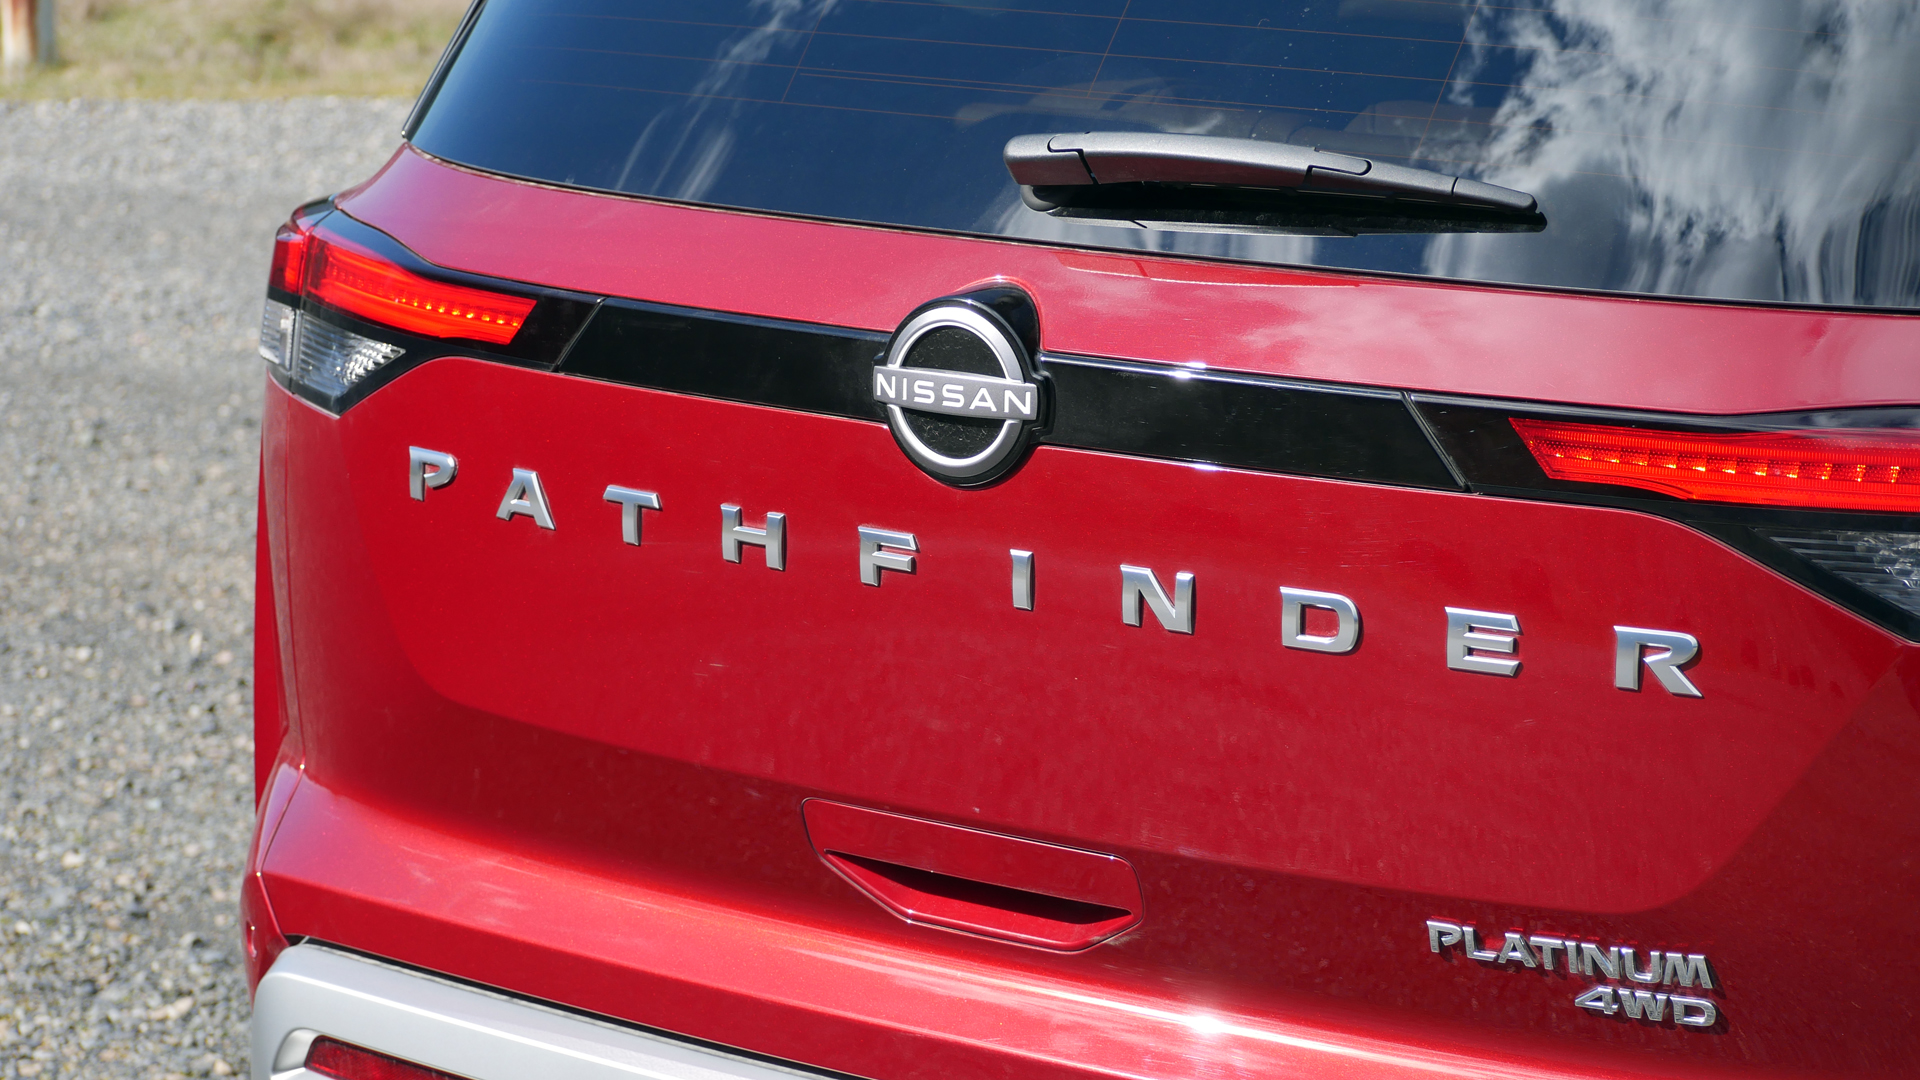 2023 Nissan Pathfinder Review: Now more capable of finding paths